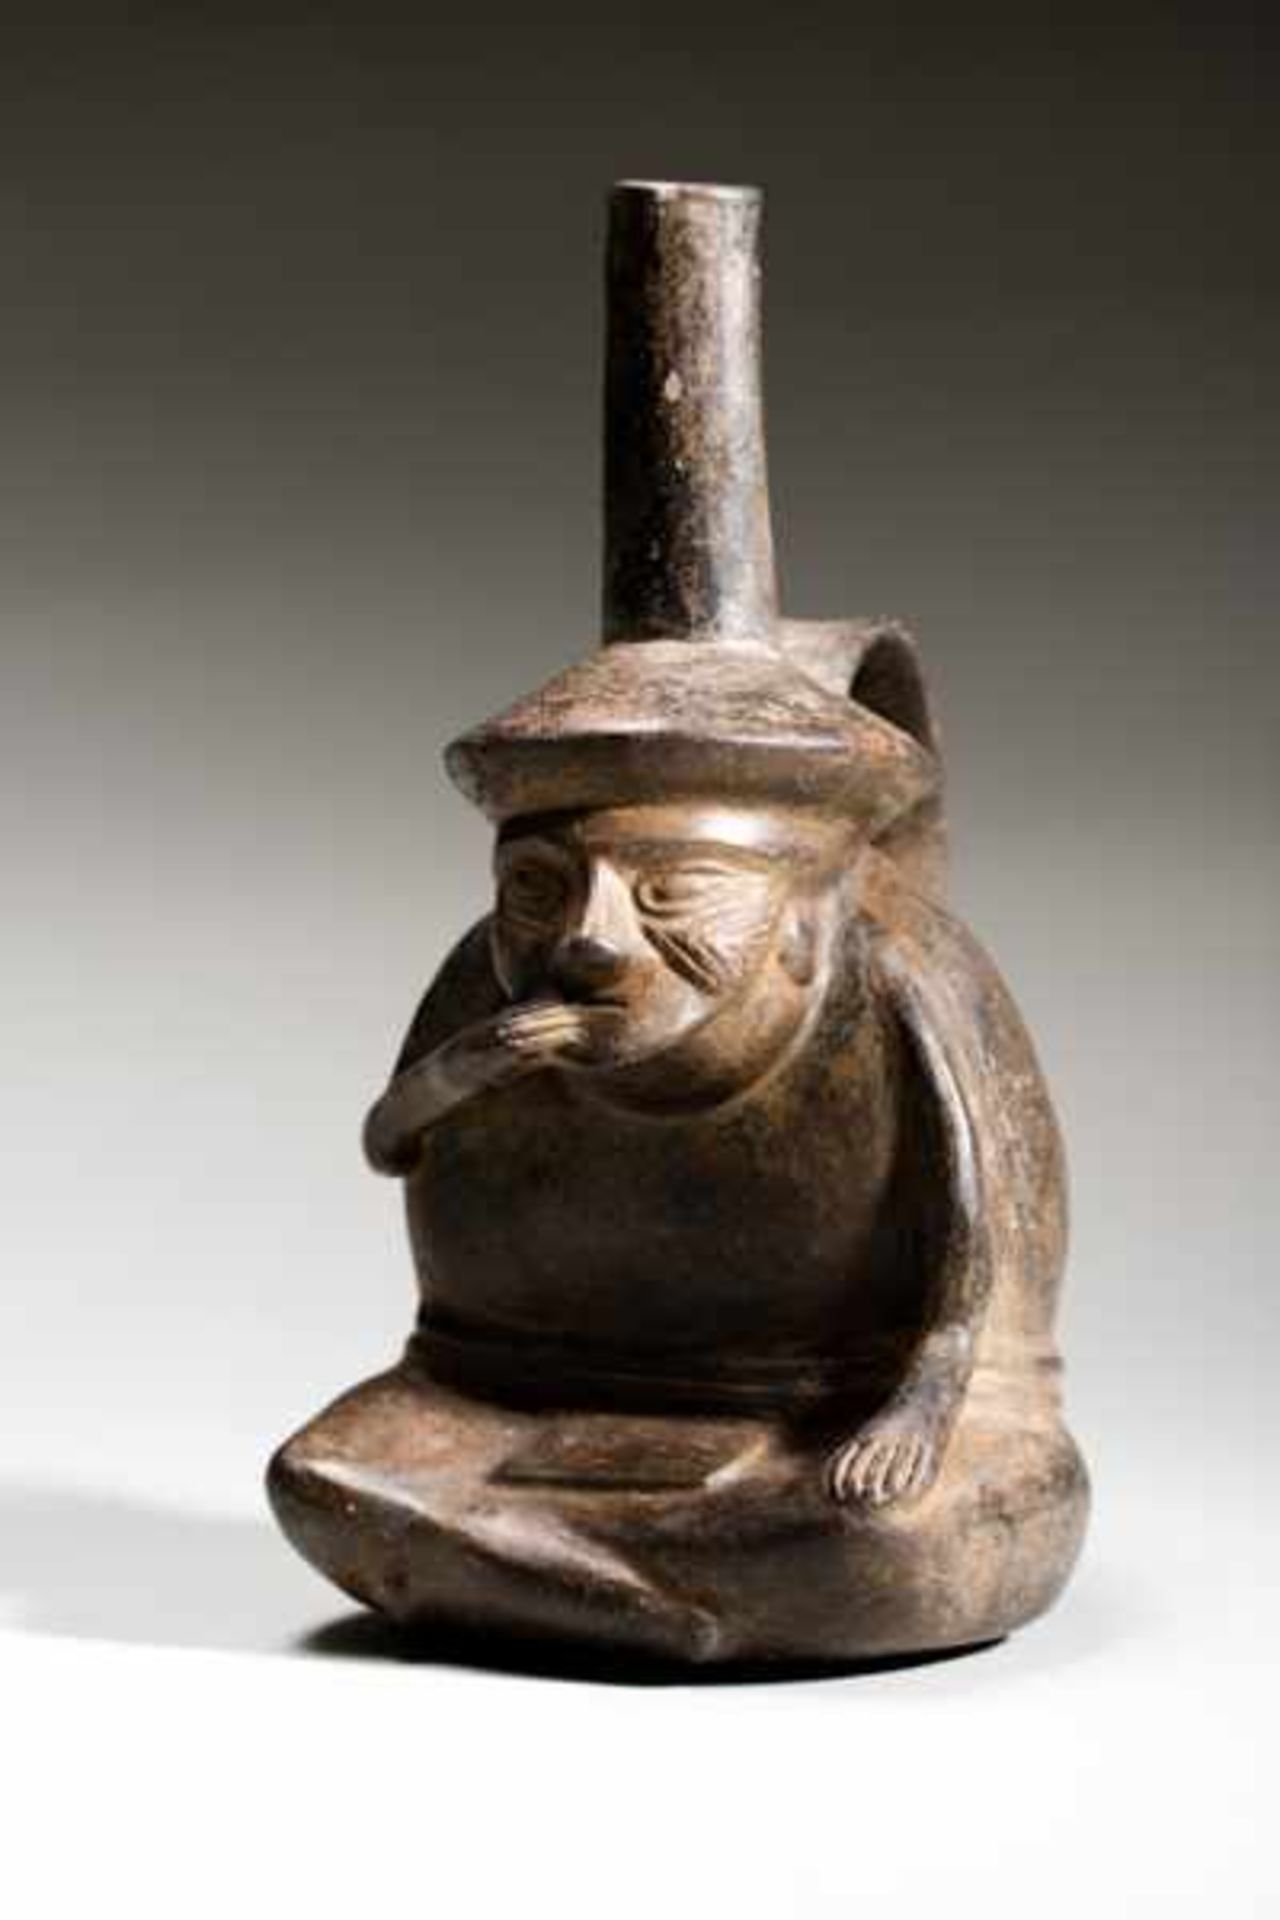 VESSEL WITH HANDLE IN THE SHAPE OF A SITTING MAN Terracotta. Lambayeque, Peru, ca. 1200Black-gray